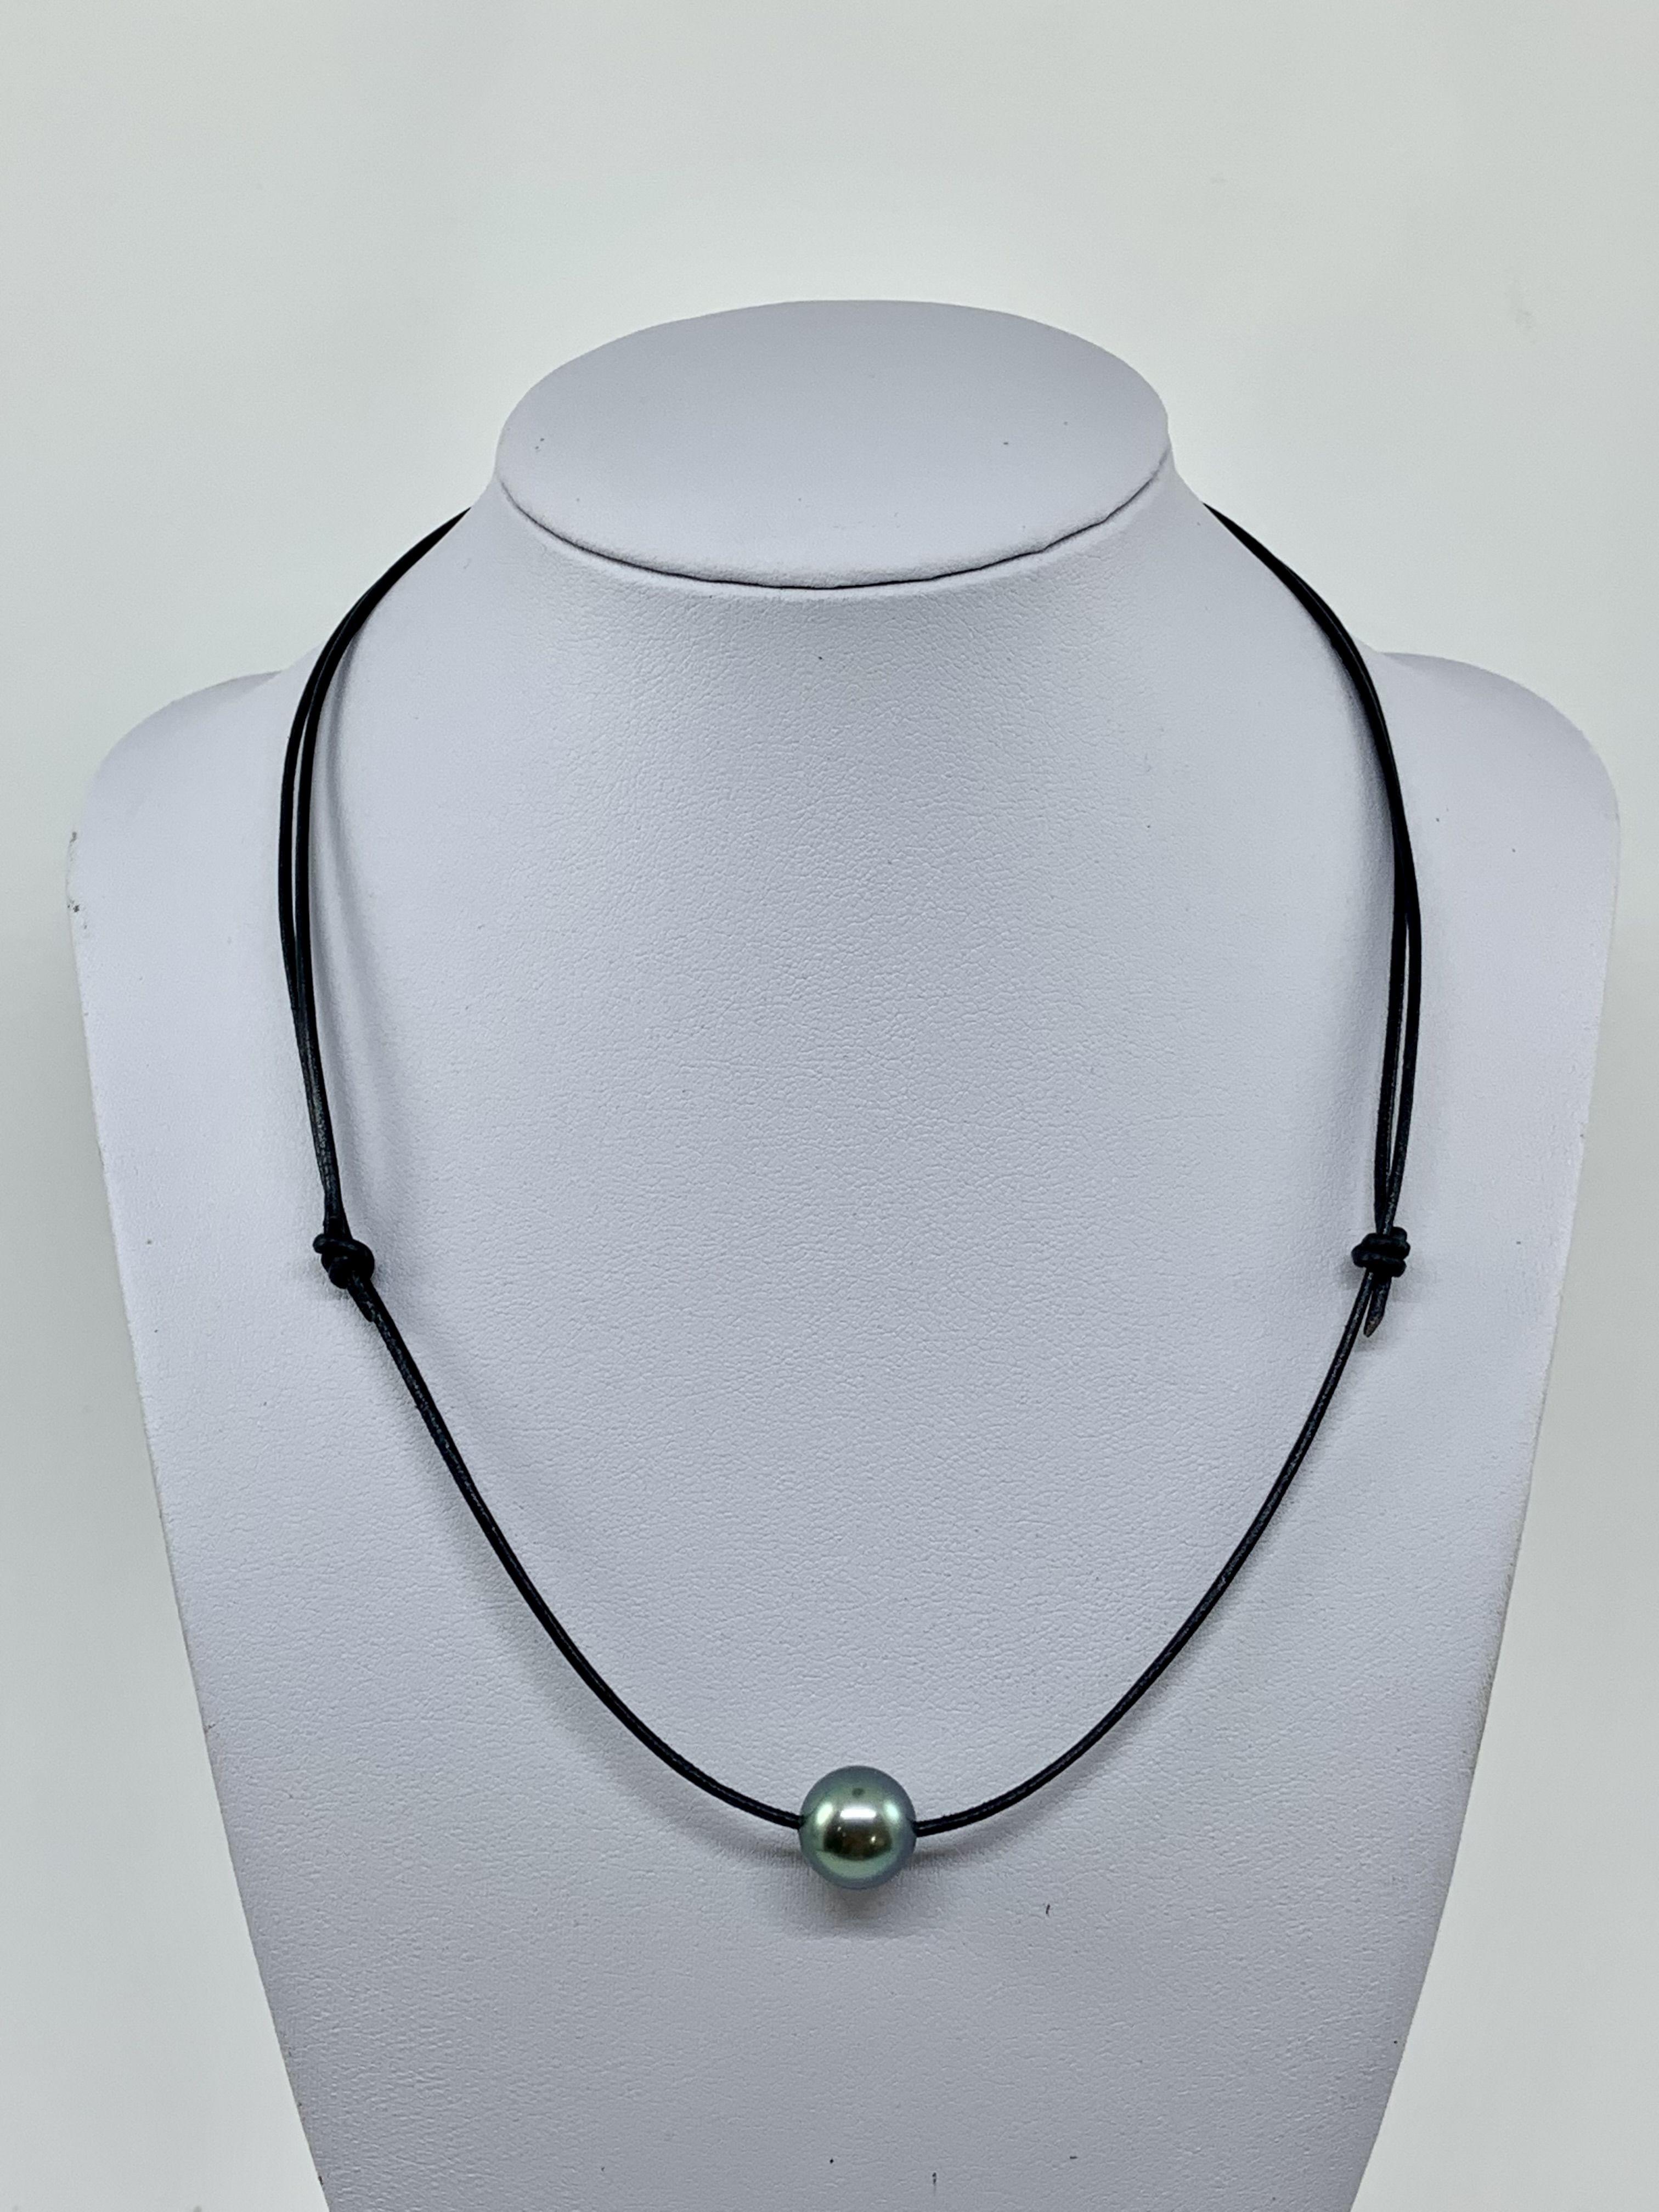 Simply Beautiful! Tahitian Pearl on Leather Cord Necklace. Hand set with an 11.1mm Tahitian Pearl, reflects Blue Gray; on a Hand-crafted Leather cord approx. 1.6mm thickness. The necklace measures approx. 18” long. More Beautiful in real time!